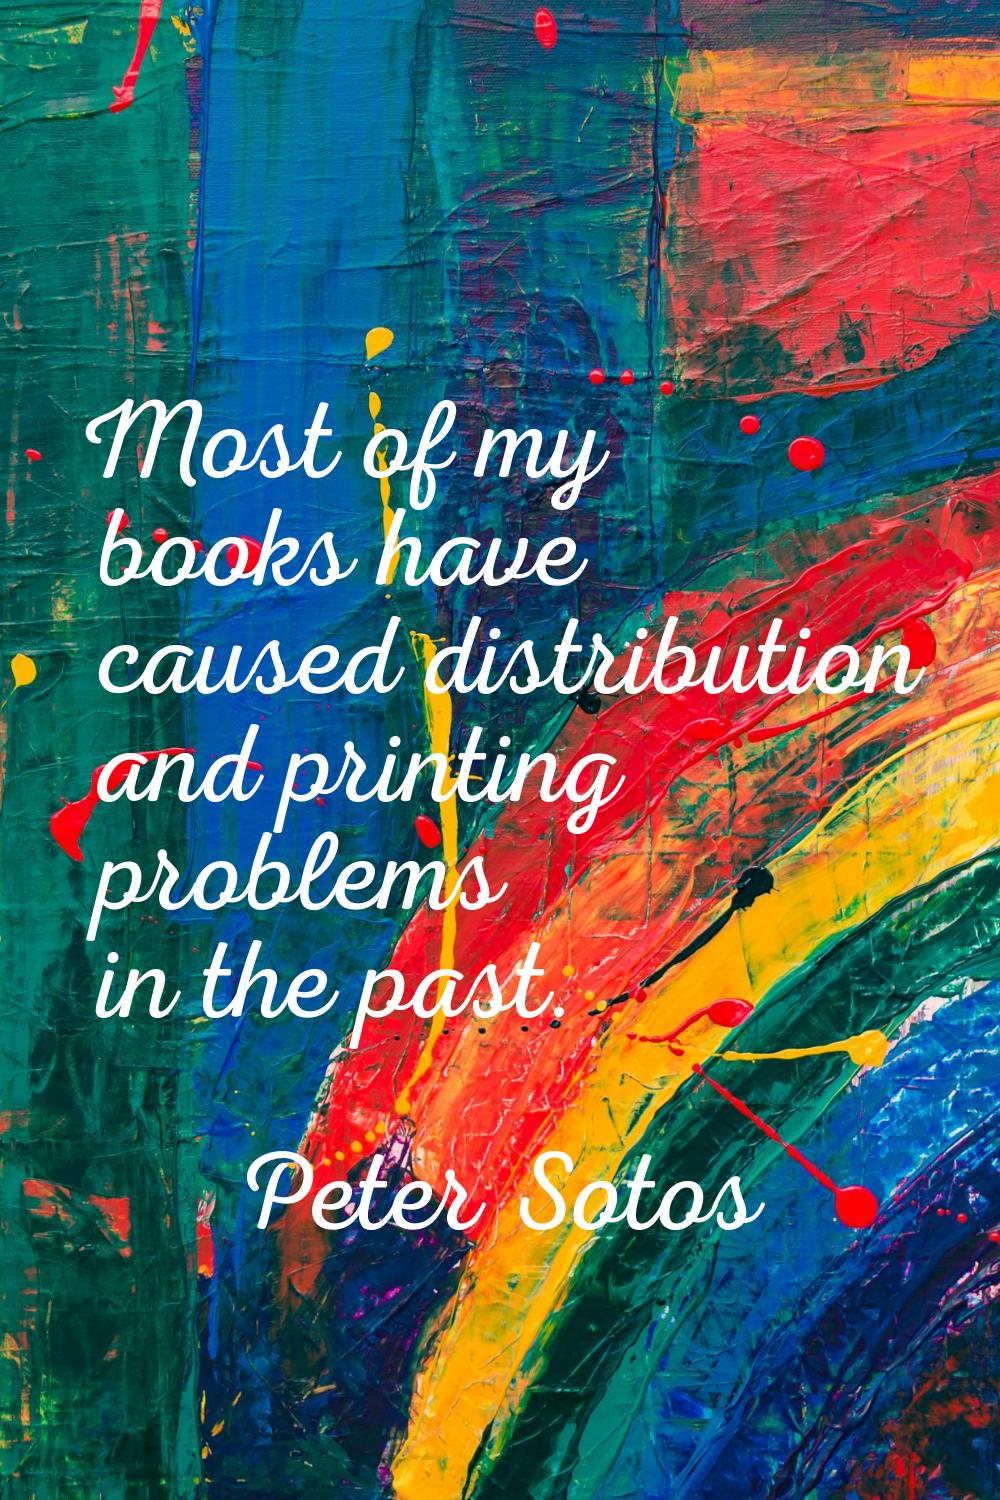 Most of my books have caused distribution and printing problems in the past.